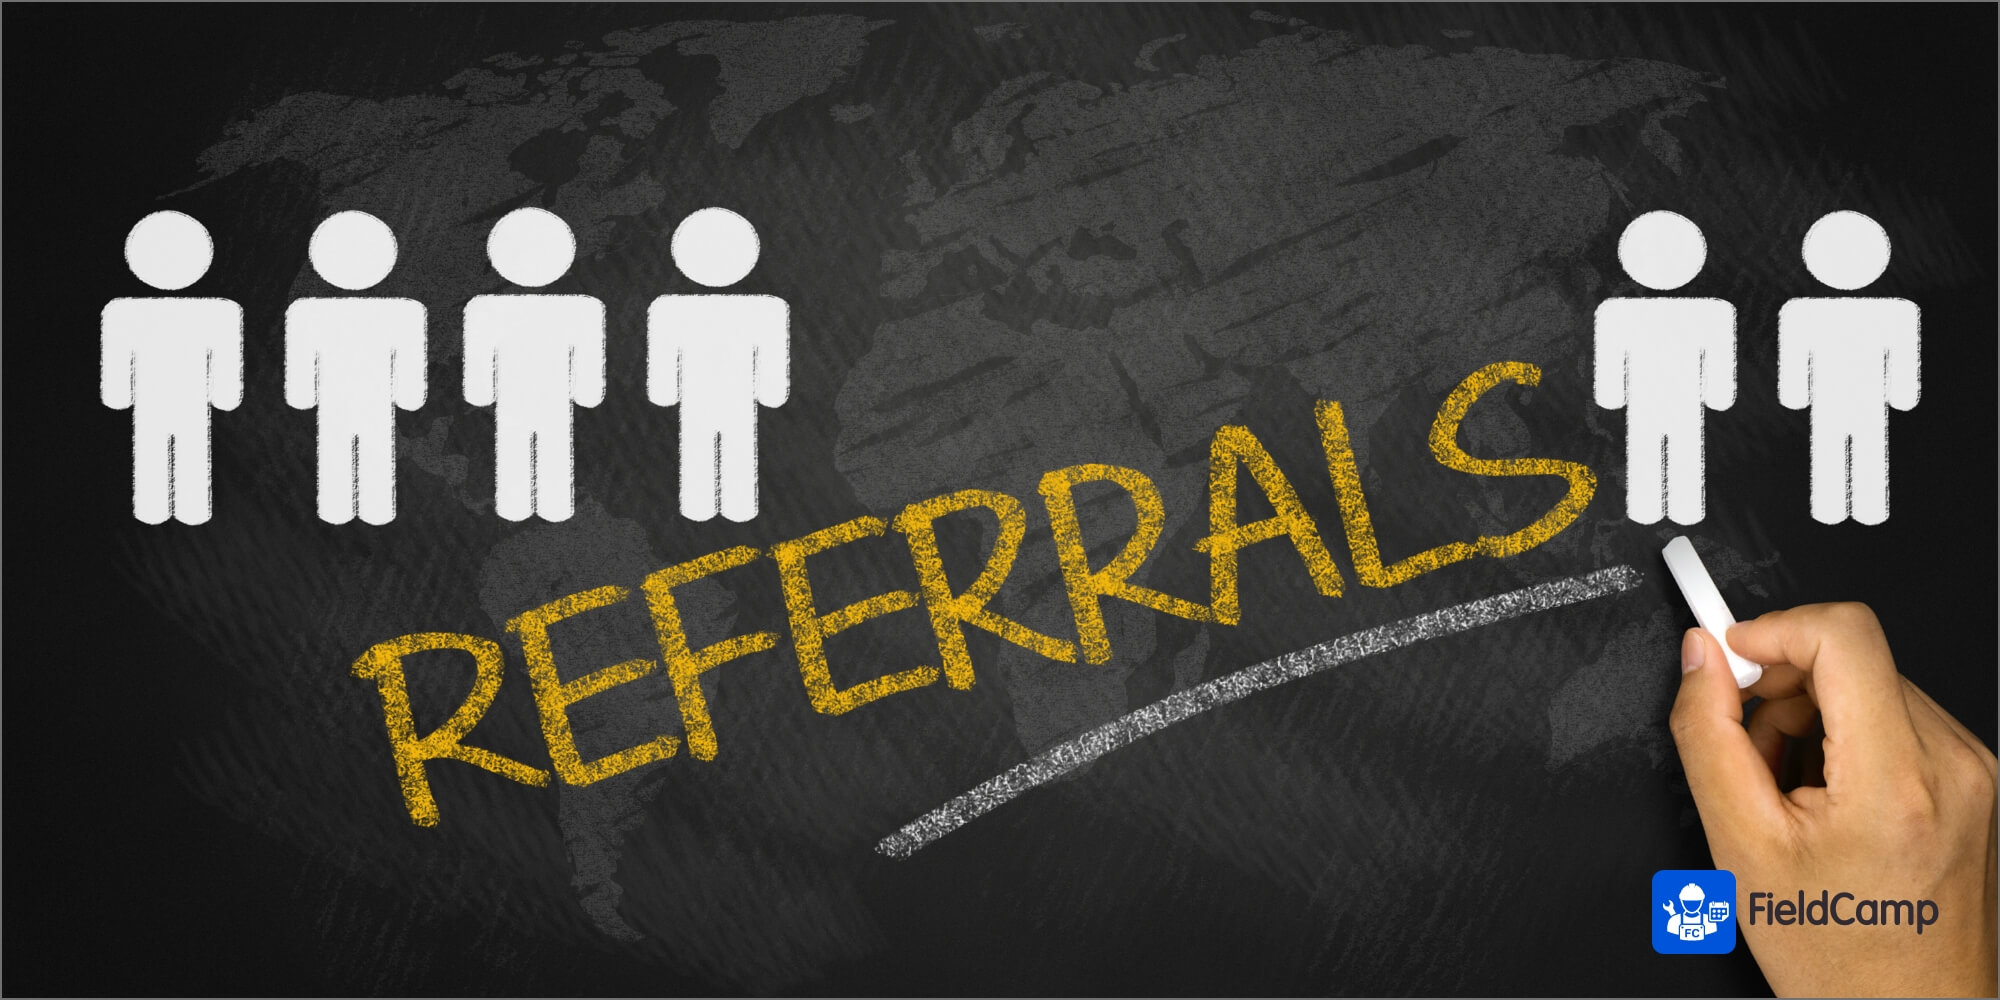 Offer referrals to other businesses - referral business ideas